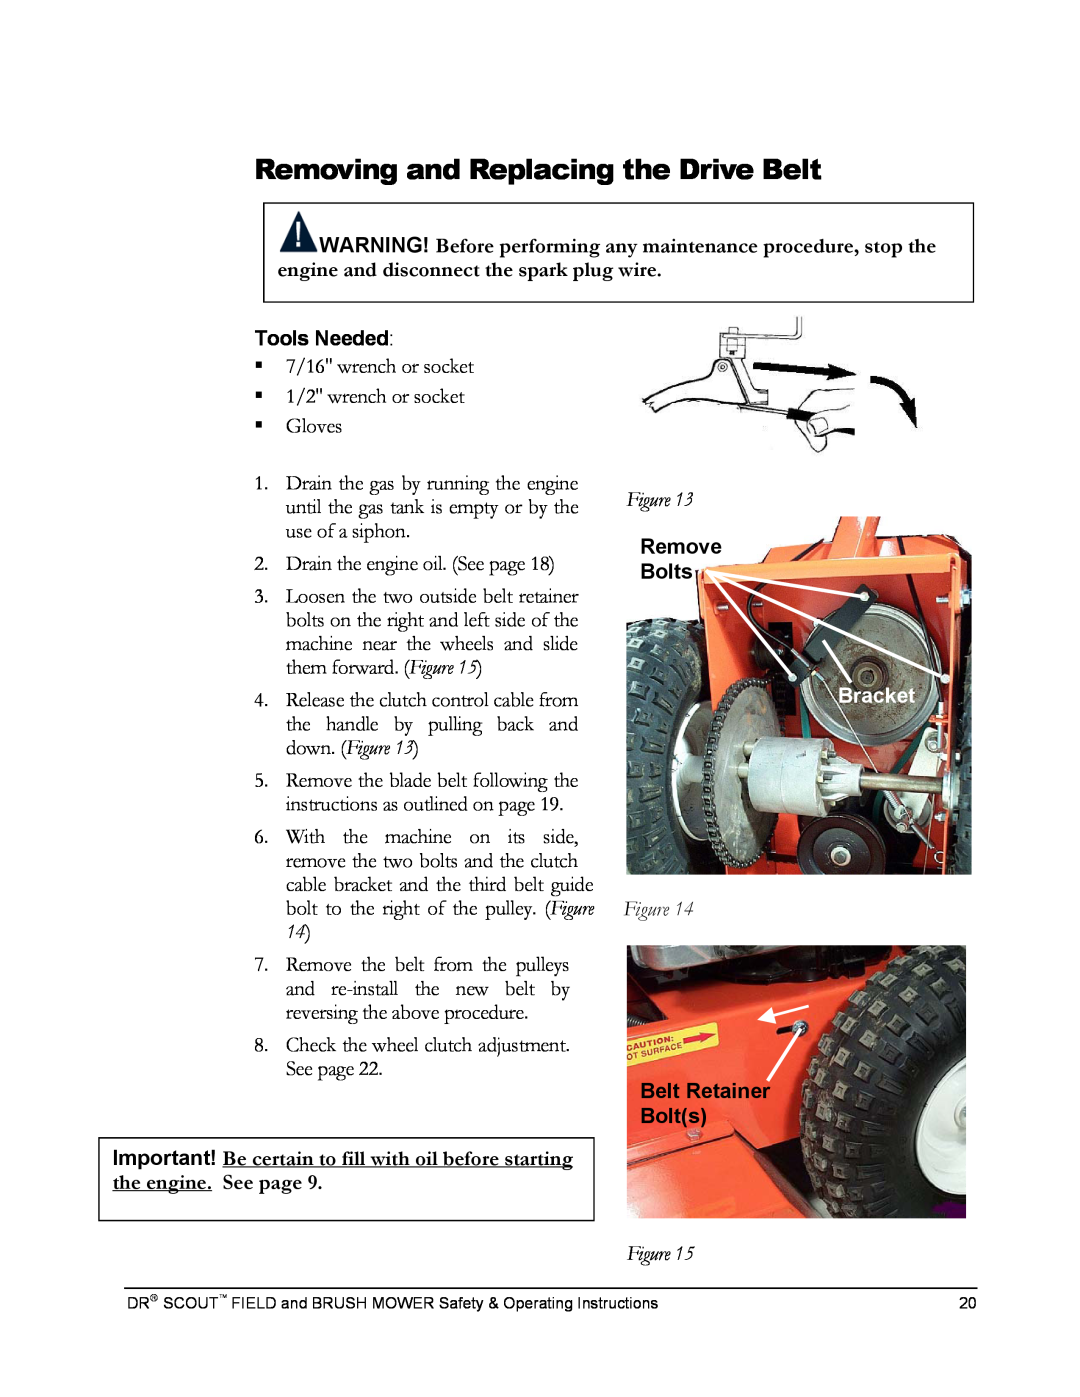 Country Home Products DR SCOUT FIELD and BRUSH MOWER manual Removing and Replacing the Drive Belt, Bracket, Tools Needed 